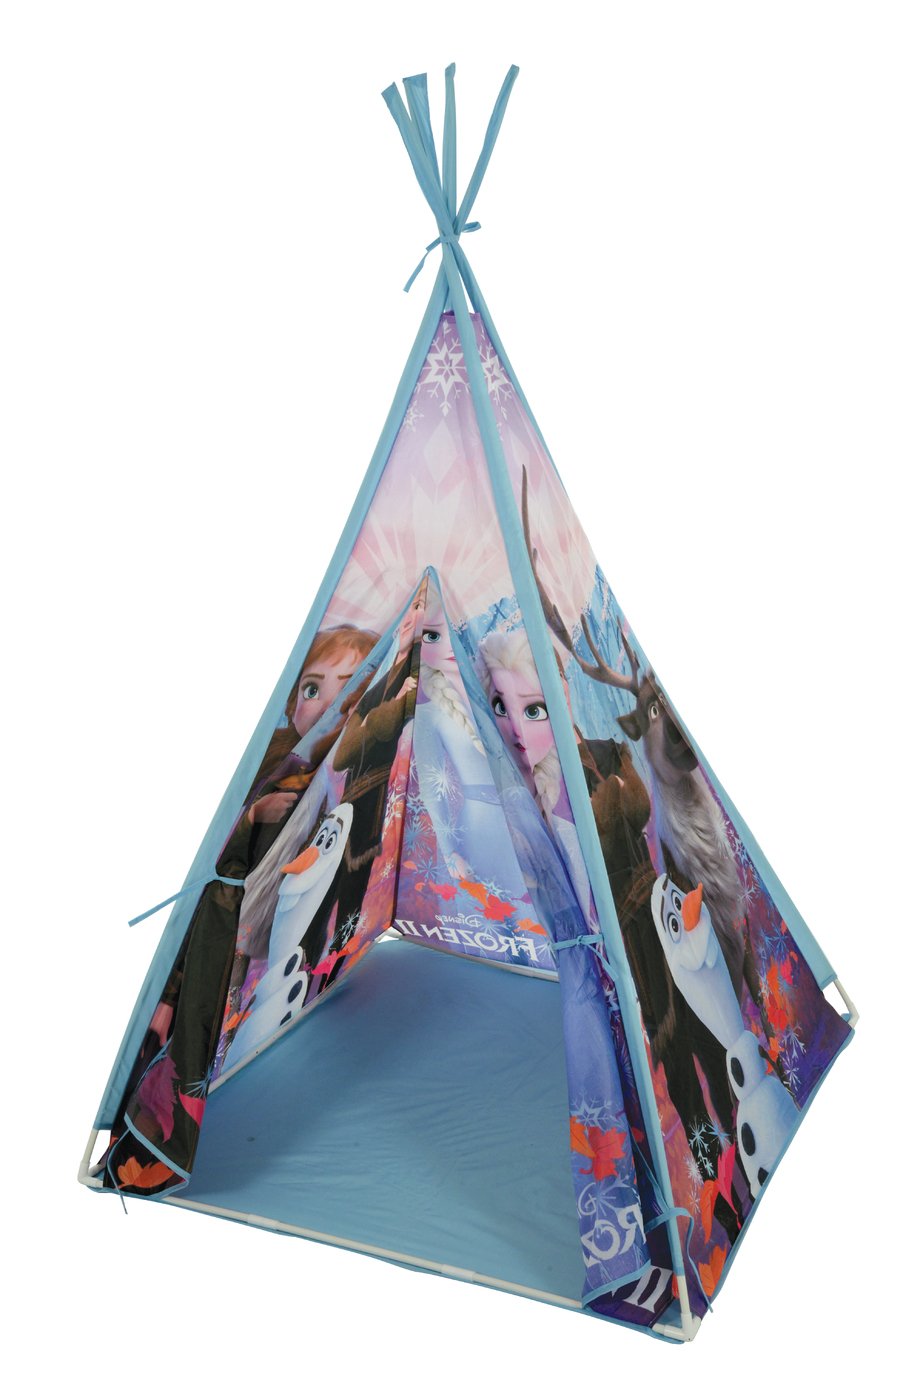 Frozen 2 Teepee Review